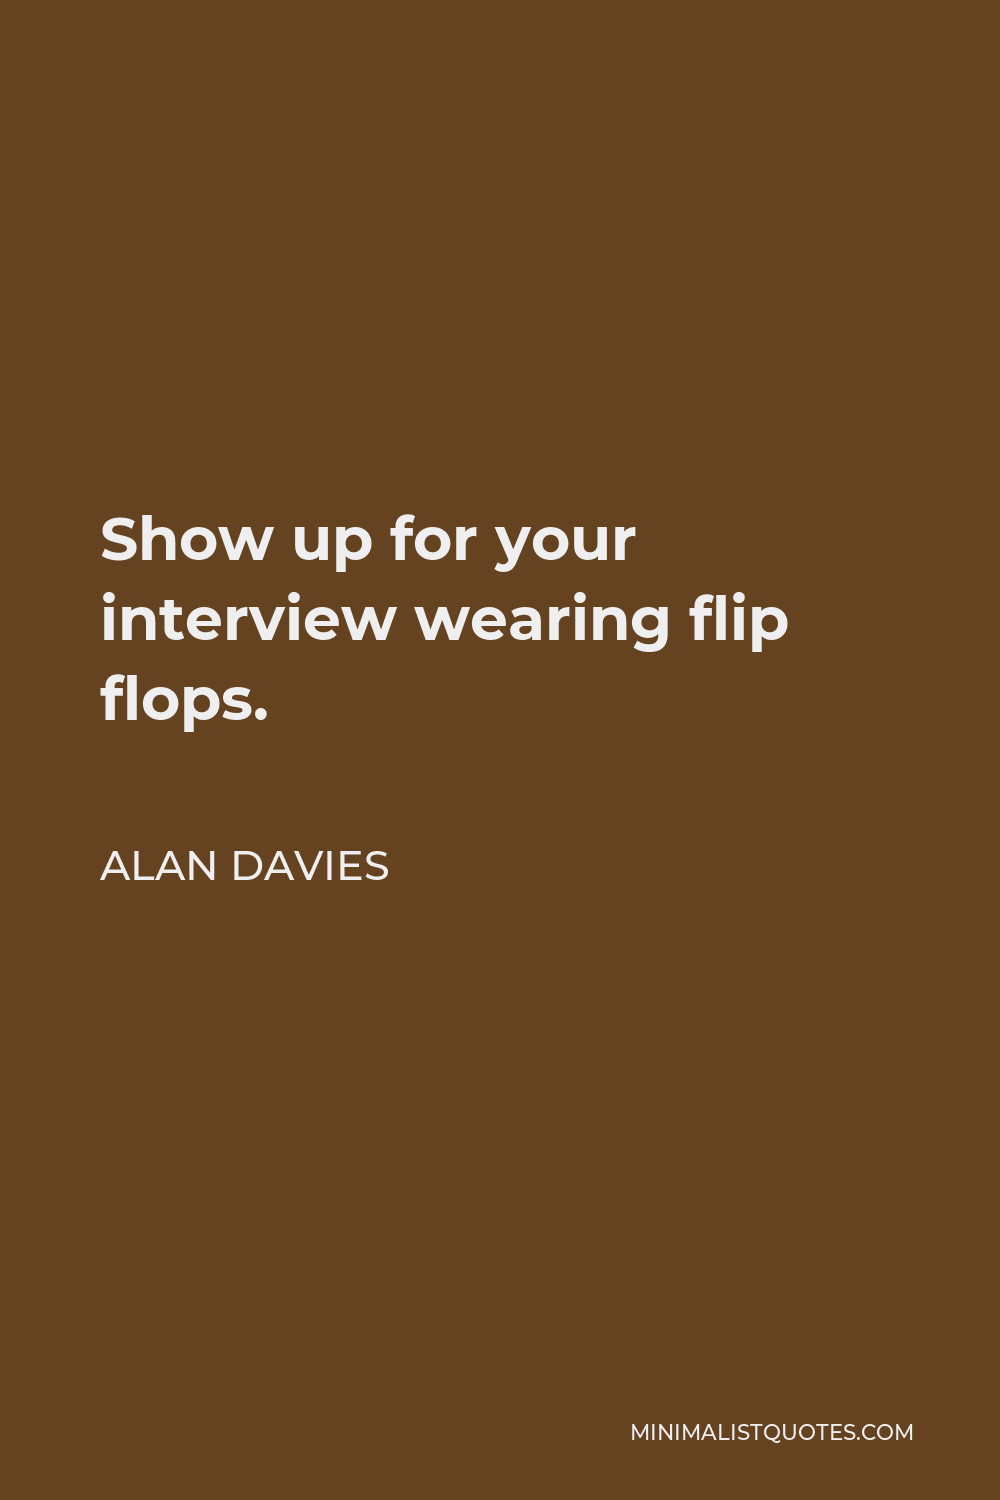 Alan Davies Quote - Show up for your interview wearing flip flops.